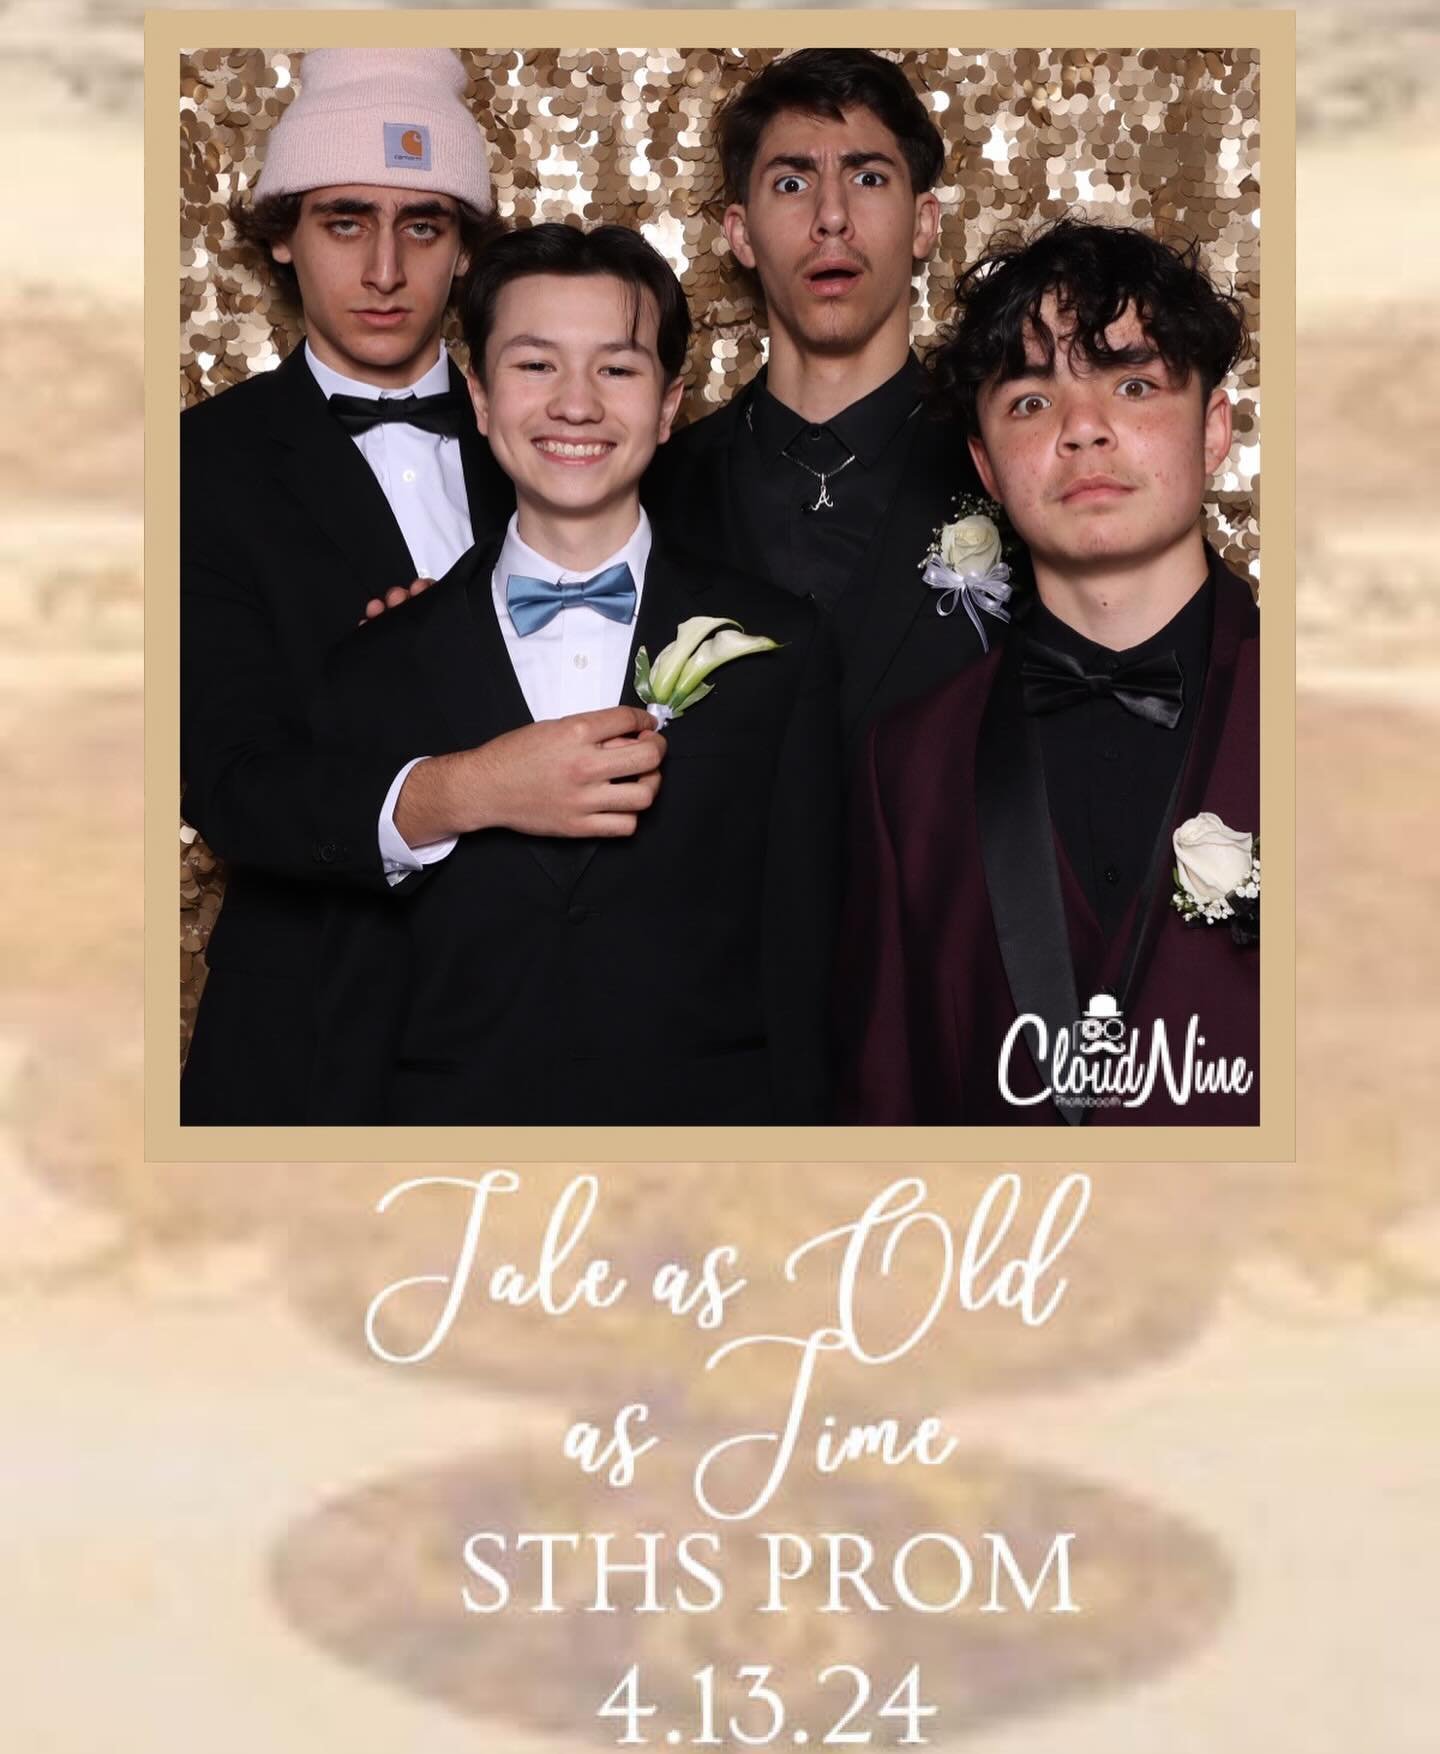 #friends for #life #prom #2024 @cloudninephotobooth #photoboothfun